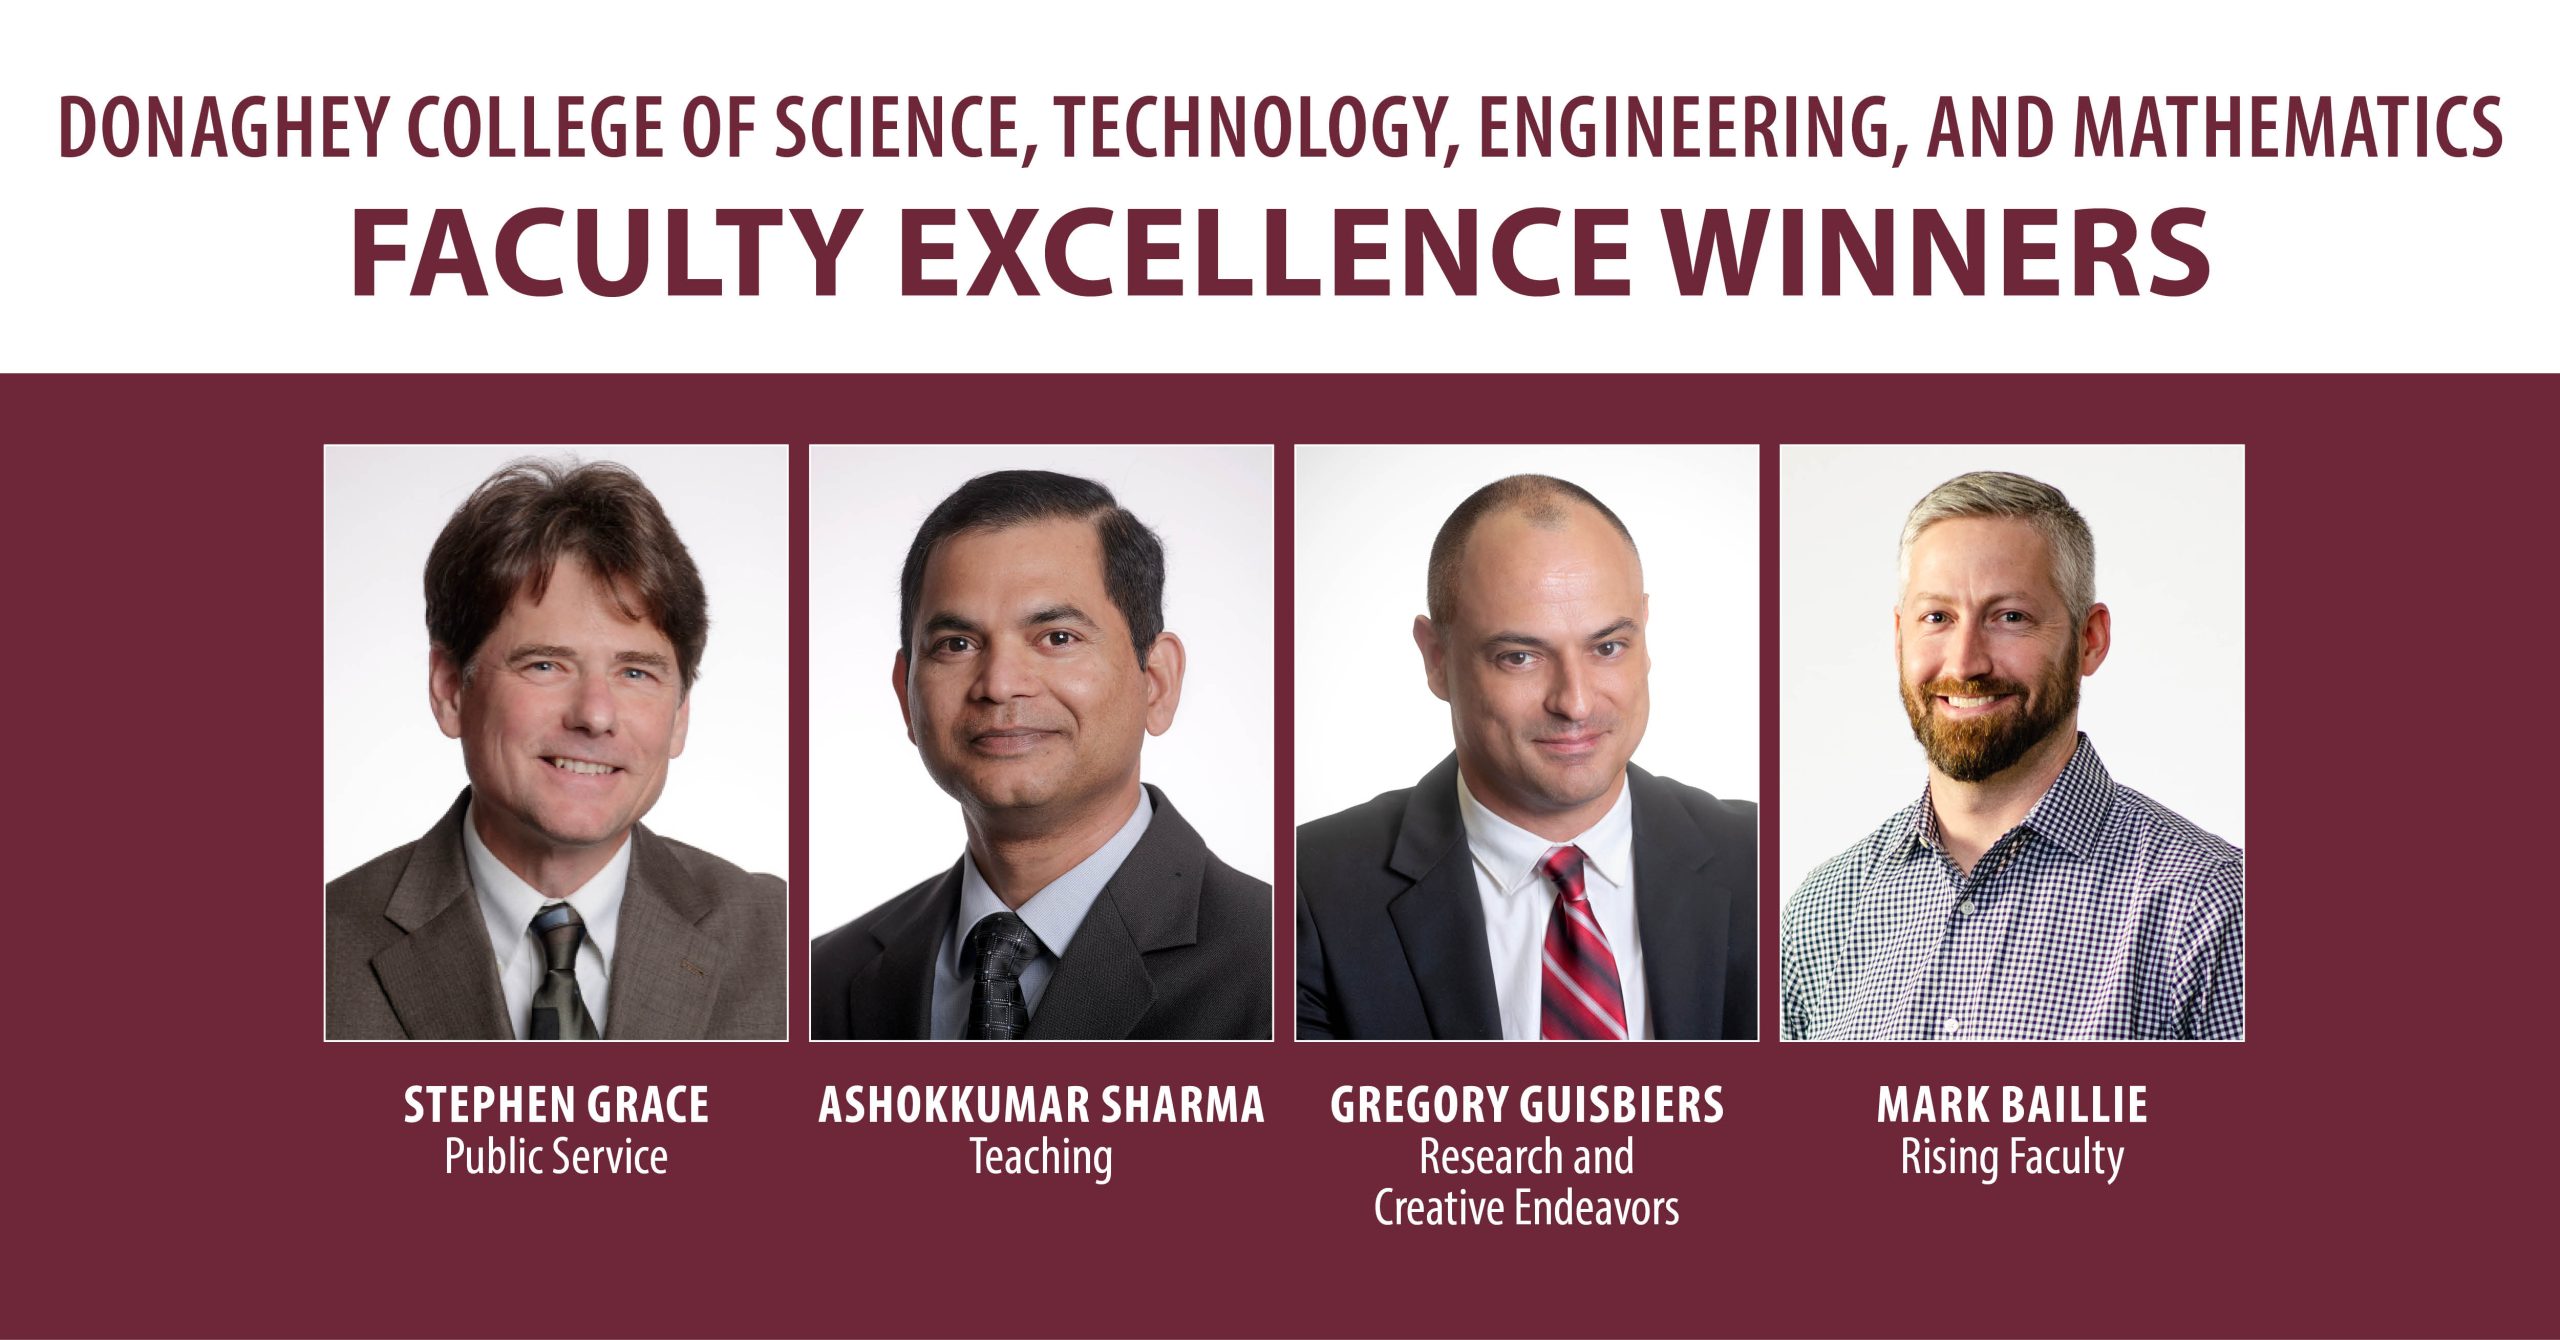 The Donaghey College of STEM has chosen Mark Baillie, Stephen Grace, Gregory Guisbiers, and Ashokkumar Sharma as its top professors of the year.